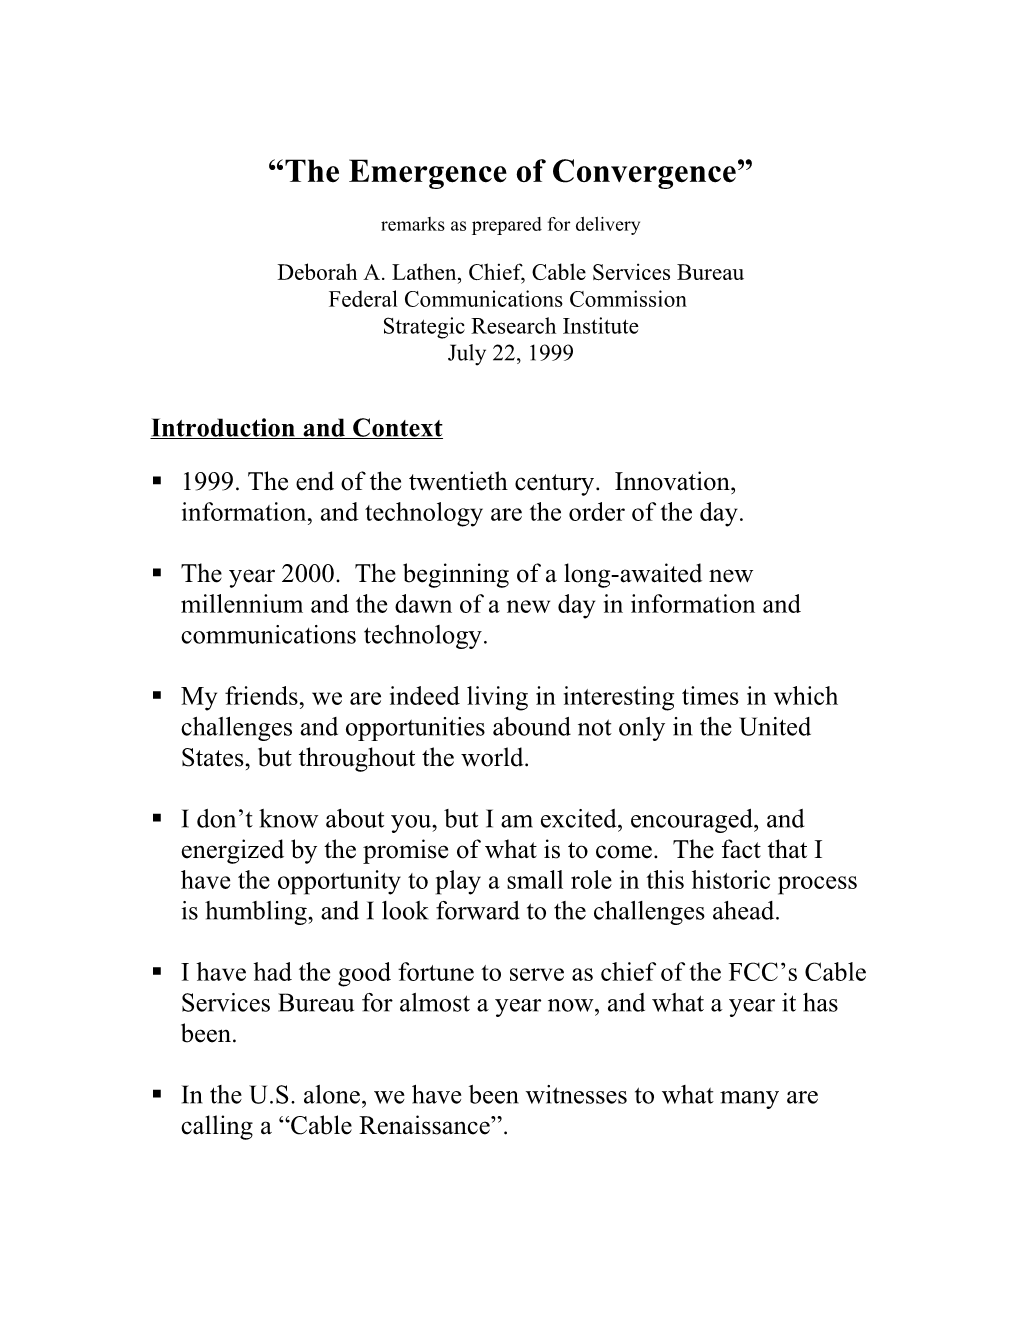 The Emergence of Convergence